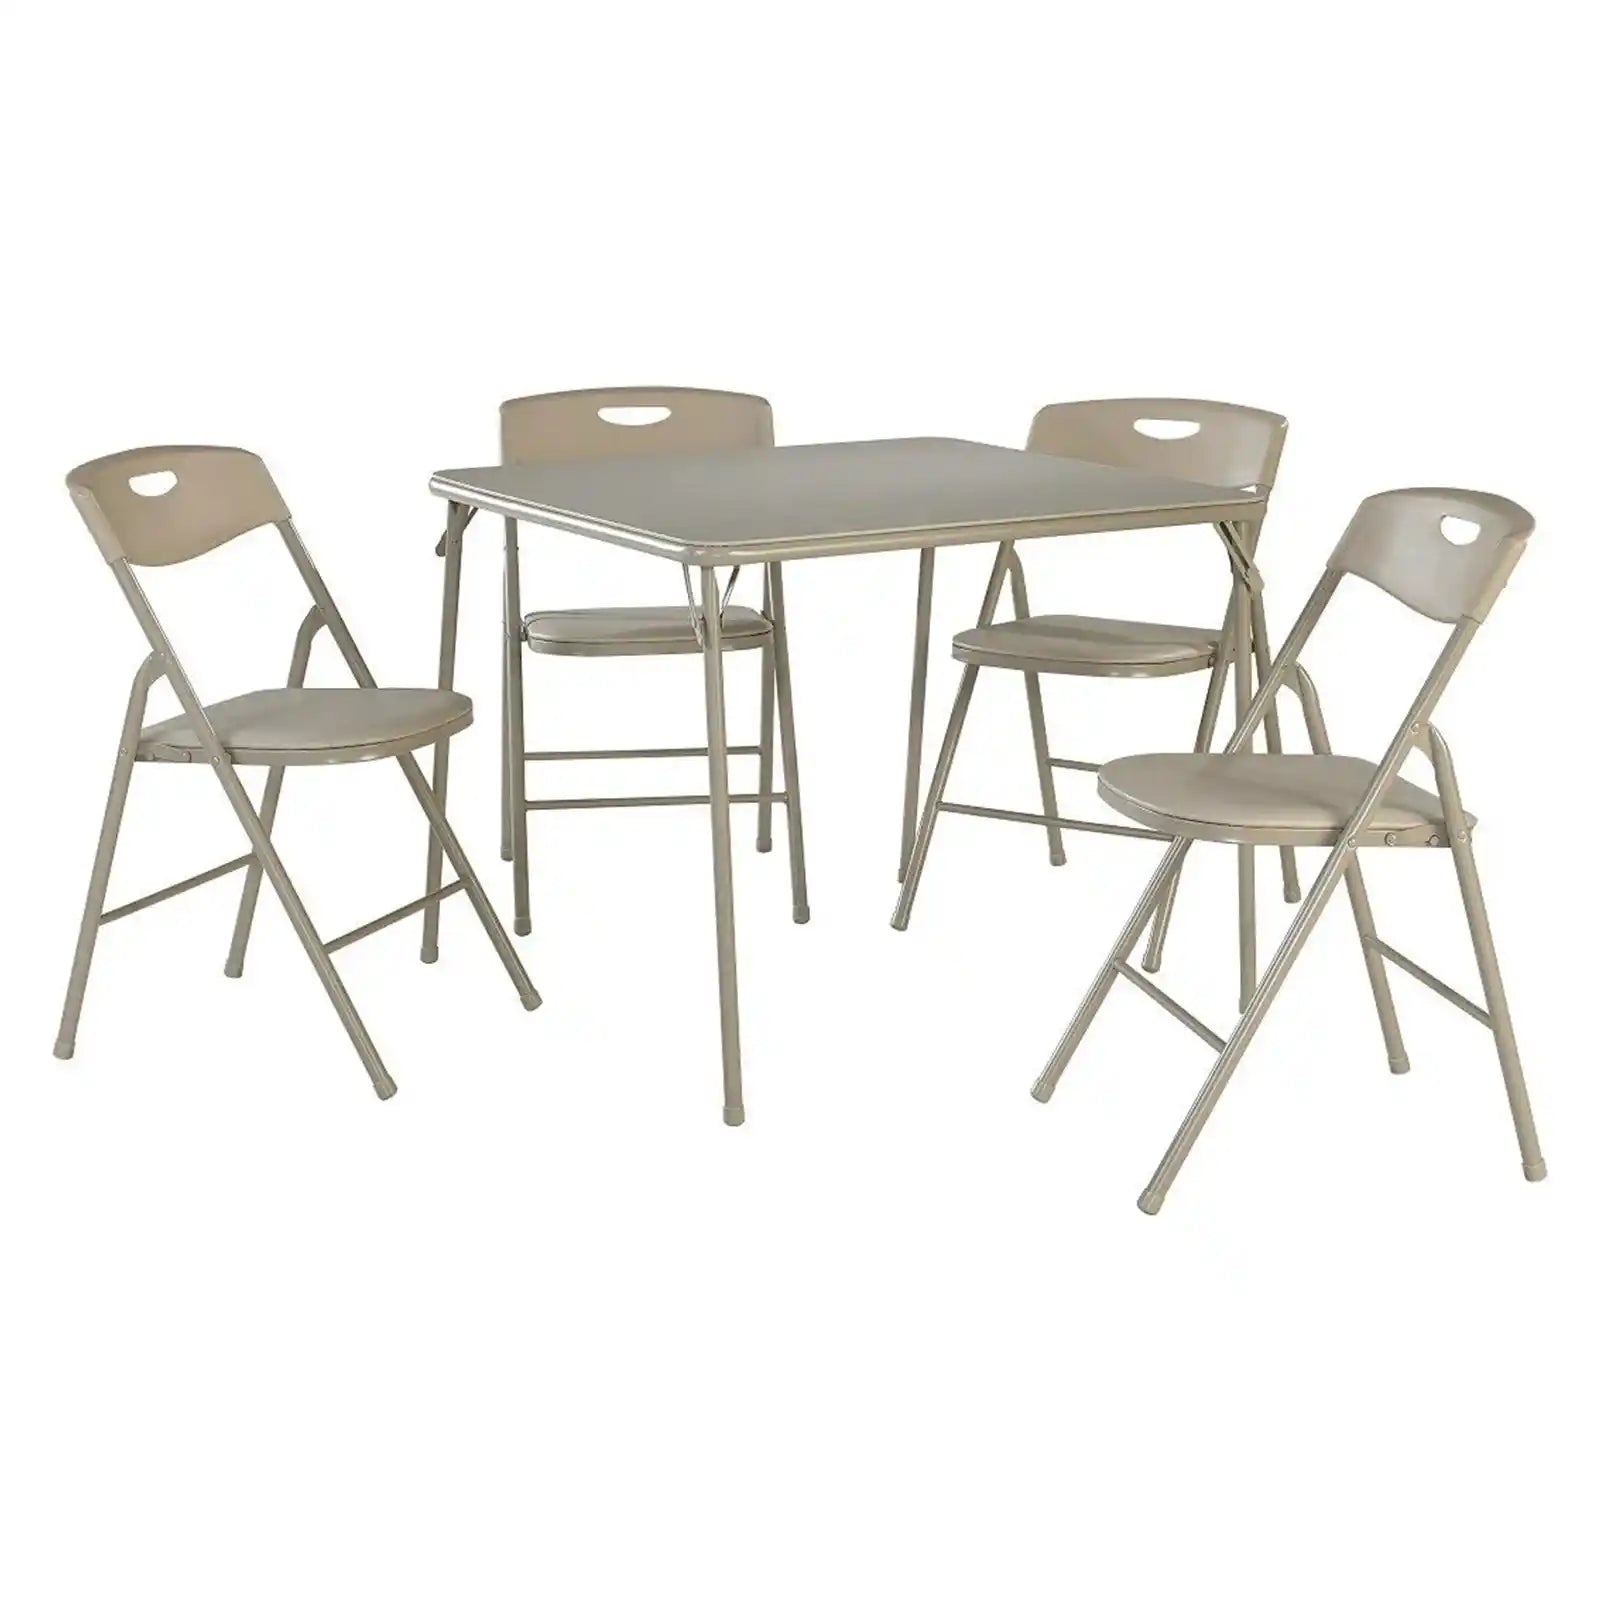 5-Piece Folding Table and Chair Set